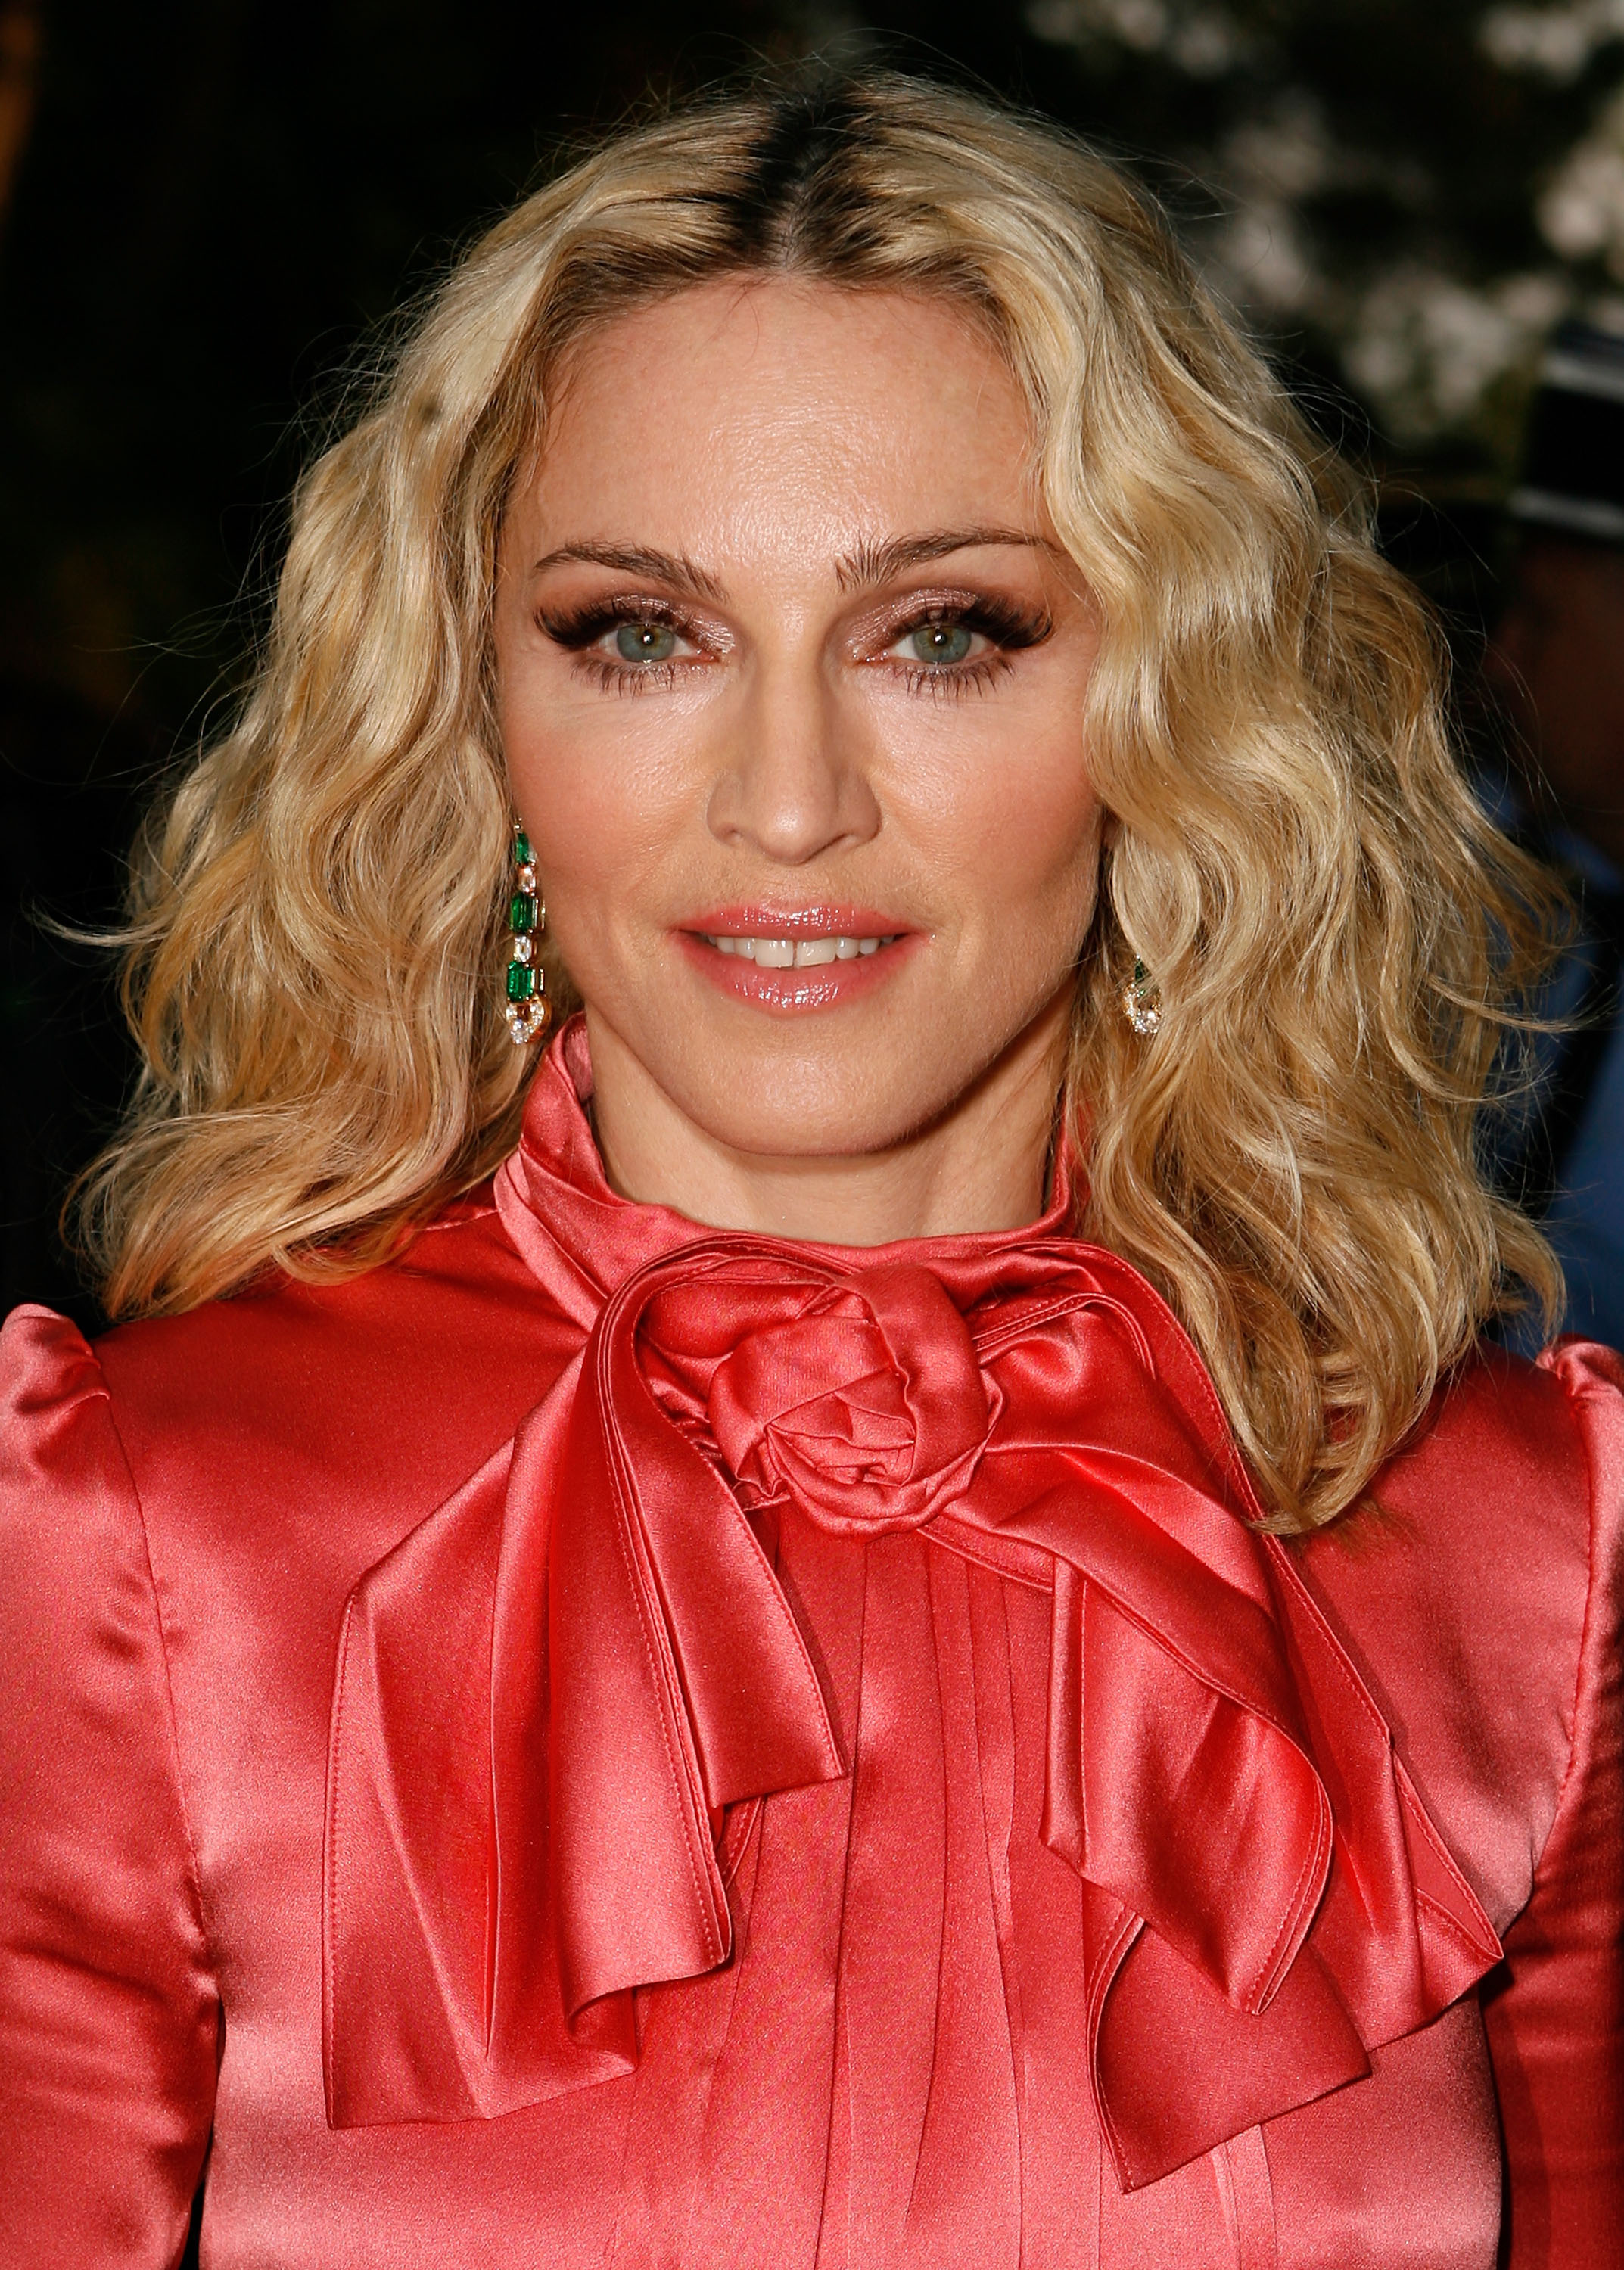 Madonna at amfAR's Cinema Against AIDS 2008 benefit held at Le Moulin de Mougins during the 61st International Cannes Film Festival on May 22, 2008 in Cannes, France | Source: Getty Images